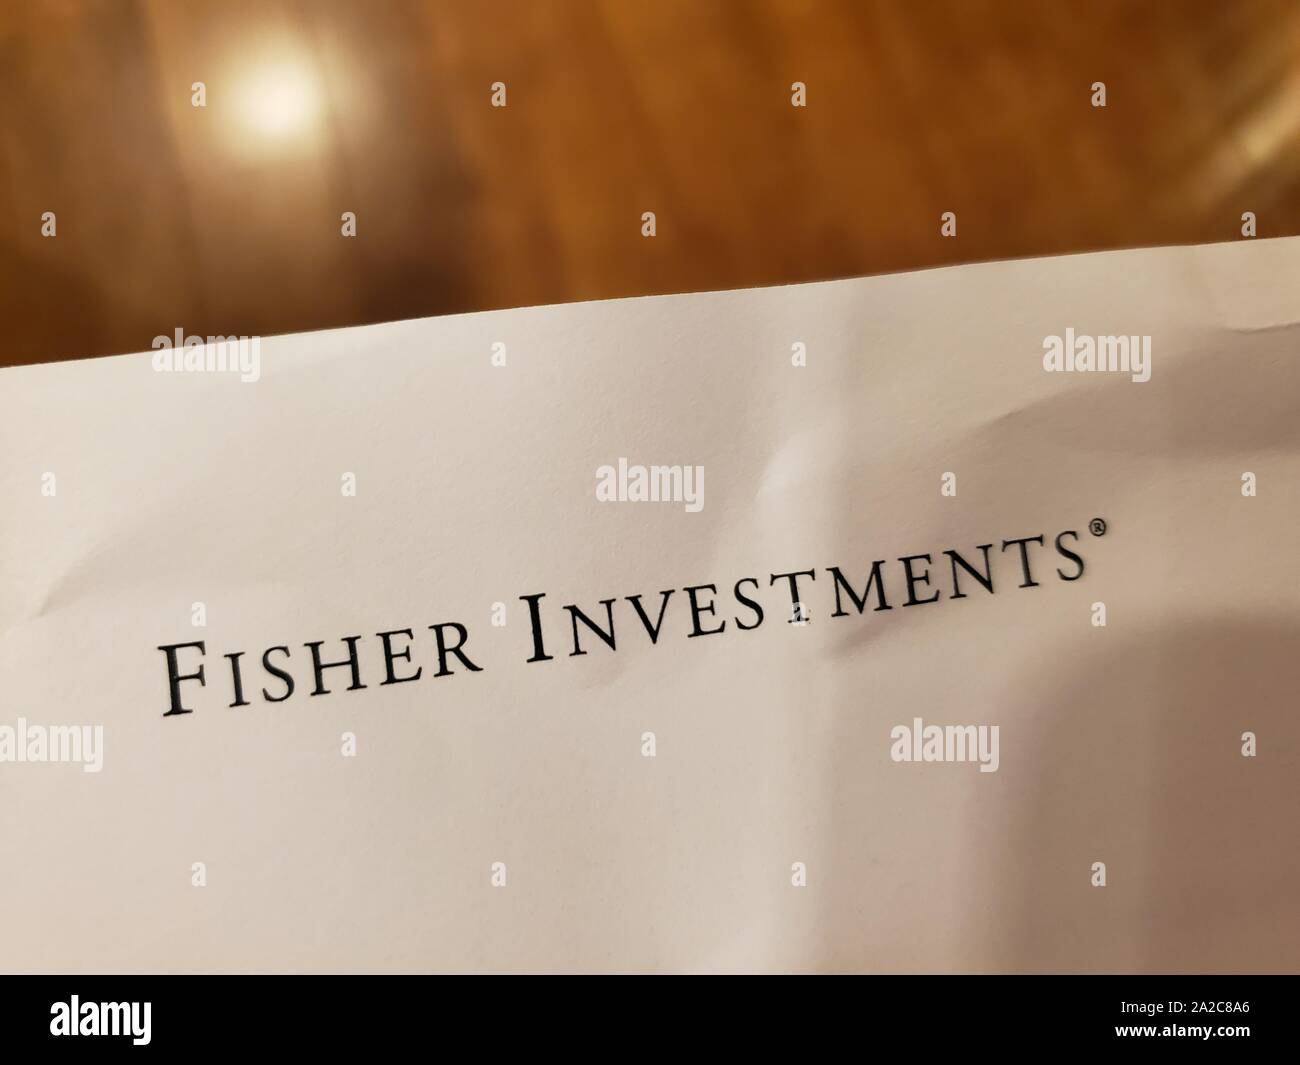 Close-up of logo for financial management company Fisher Investments on paper on light wooden background, August 29, 2019. () Stock Photo